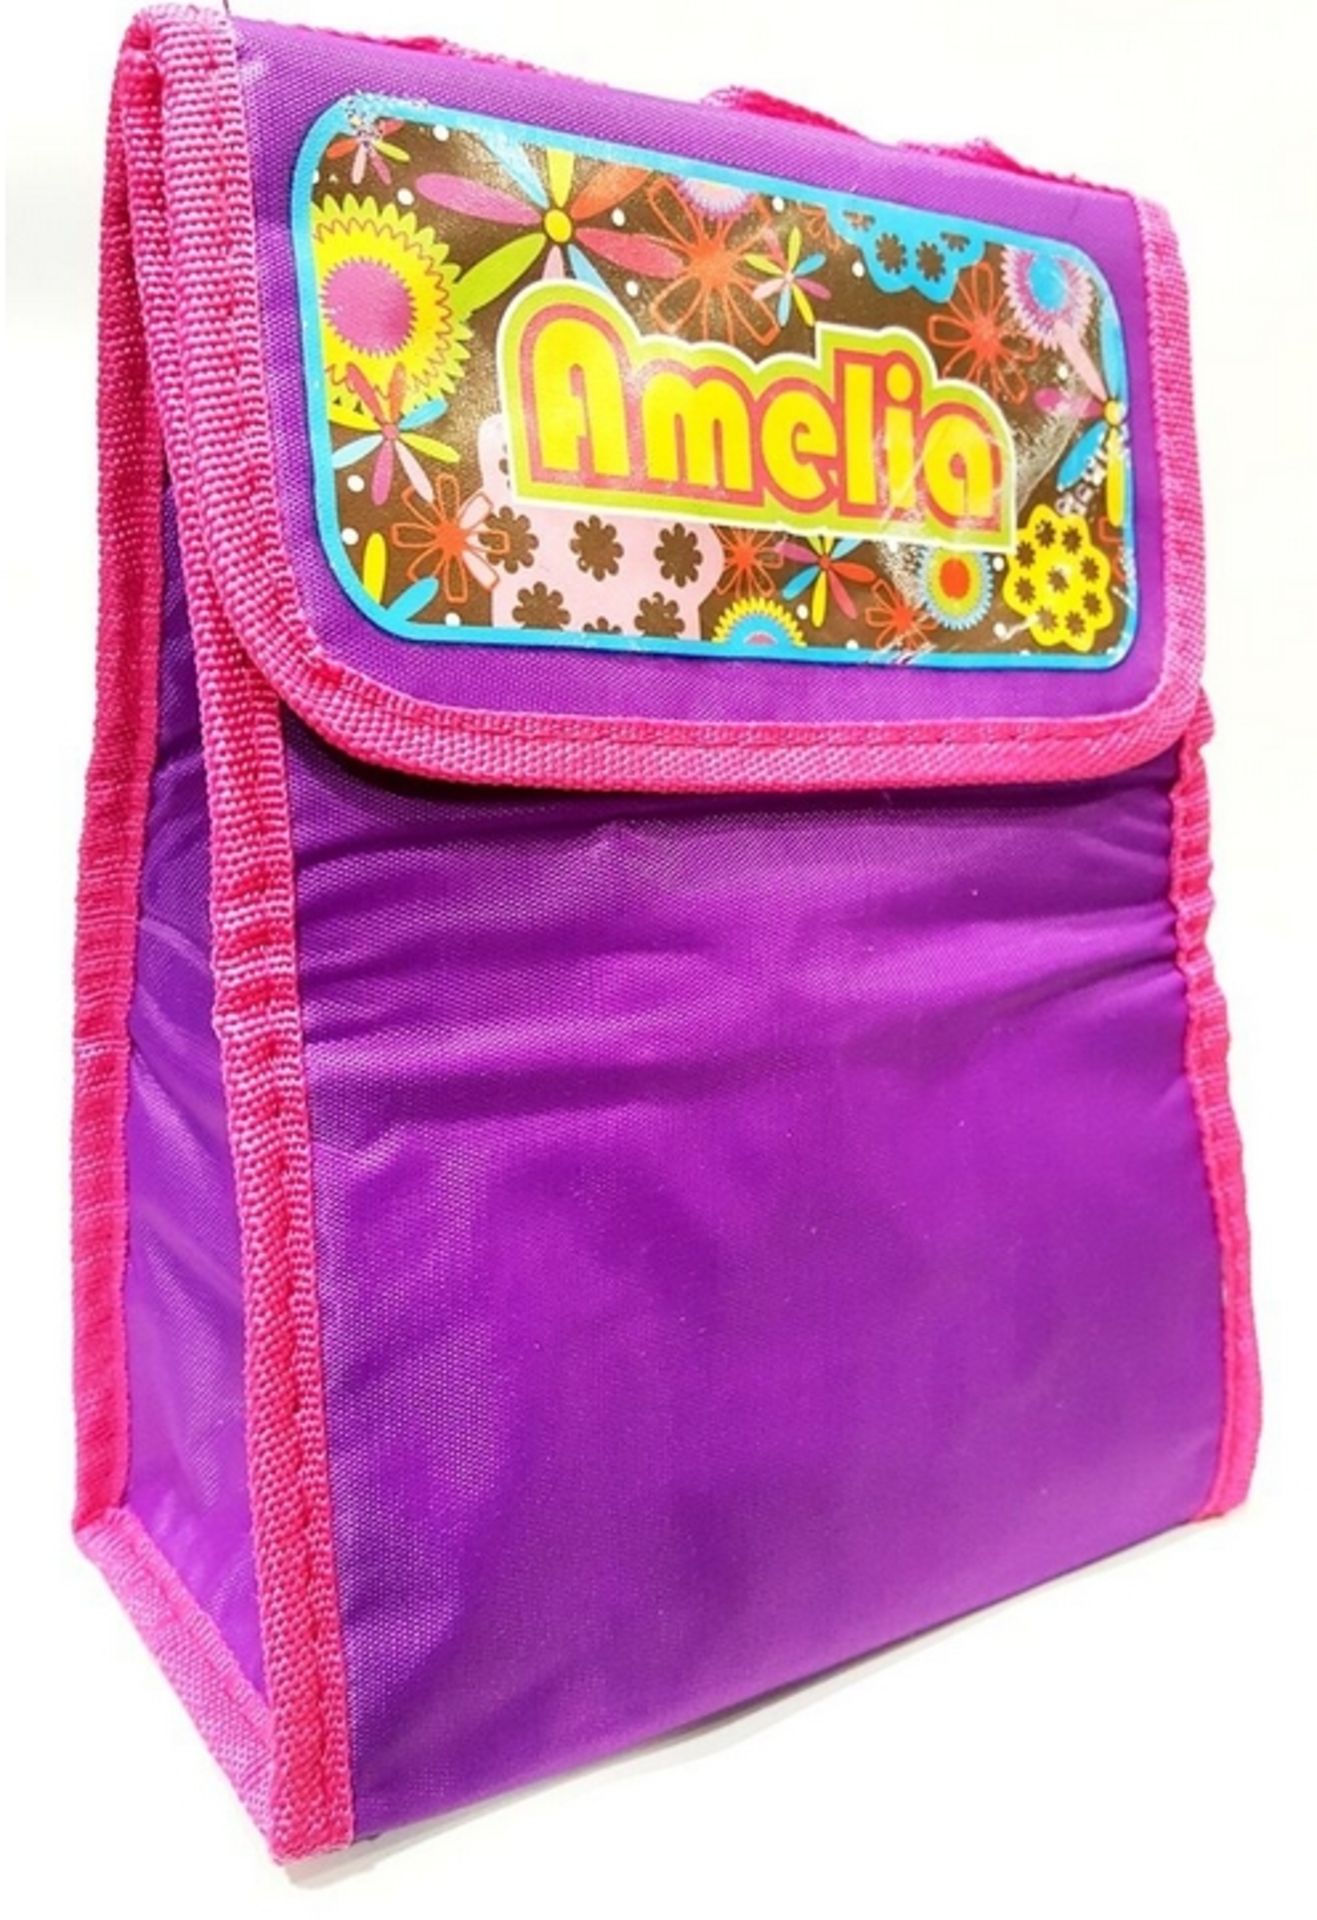 30 Randomly Picked From 100S Of Names Children's Personalised Lunch Bags Insulated Lunch Bags - Image 5 of 6